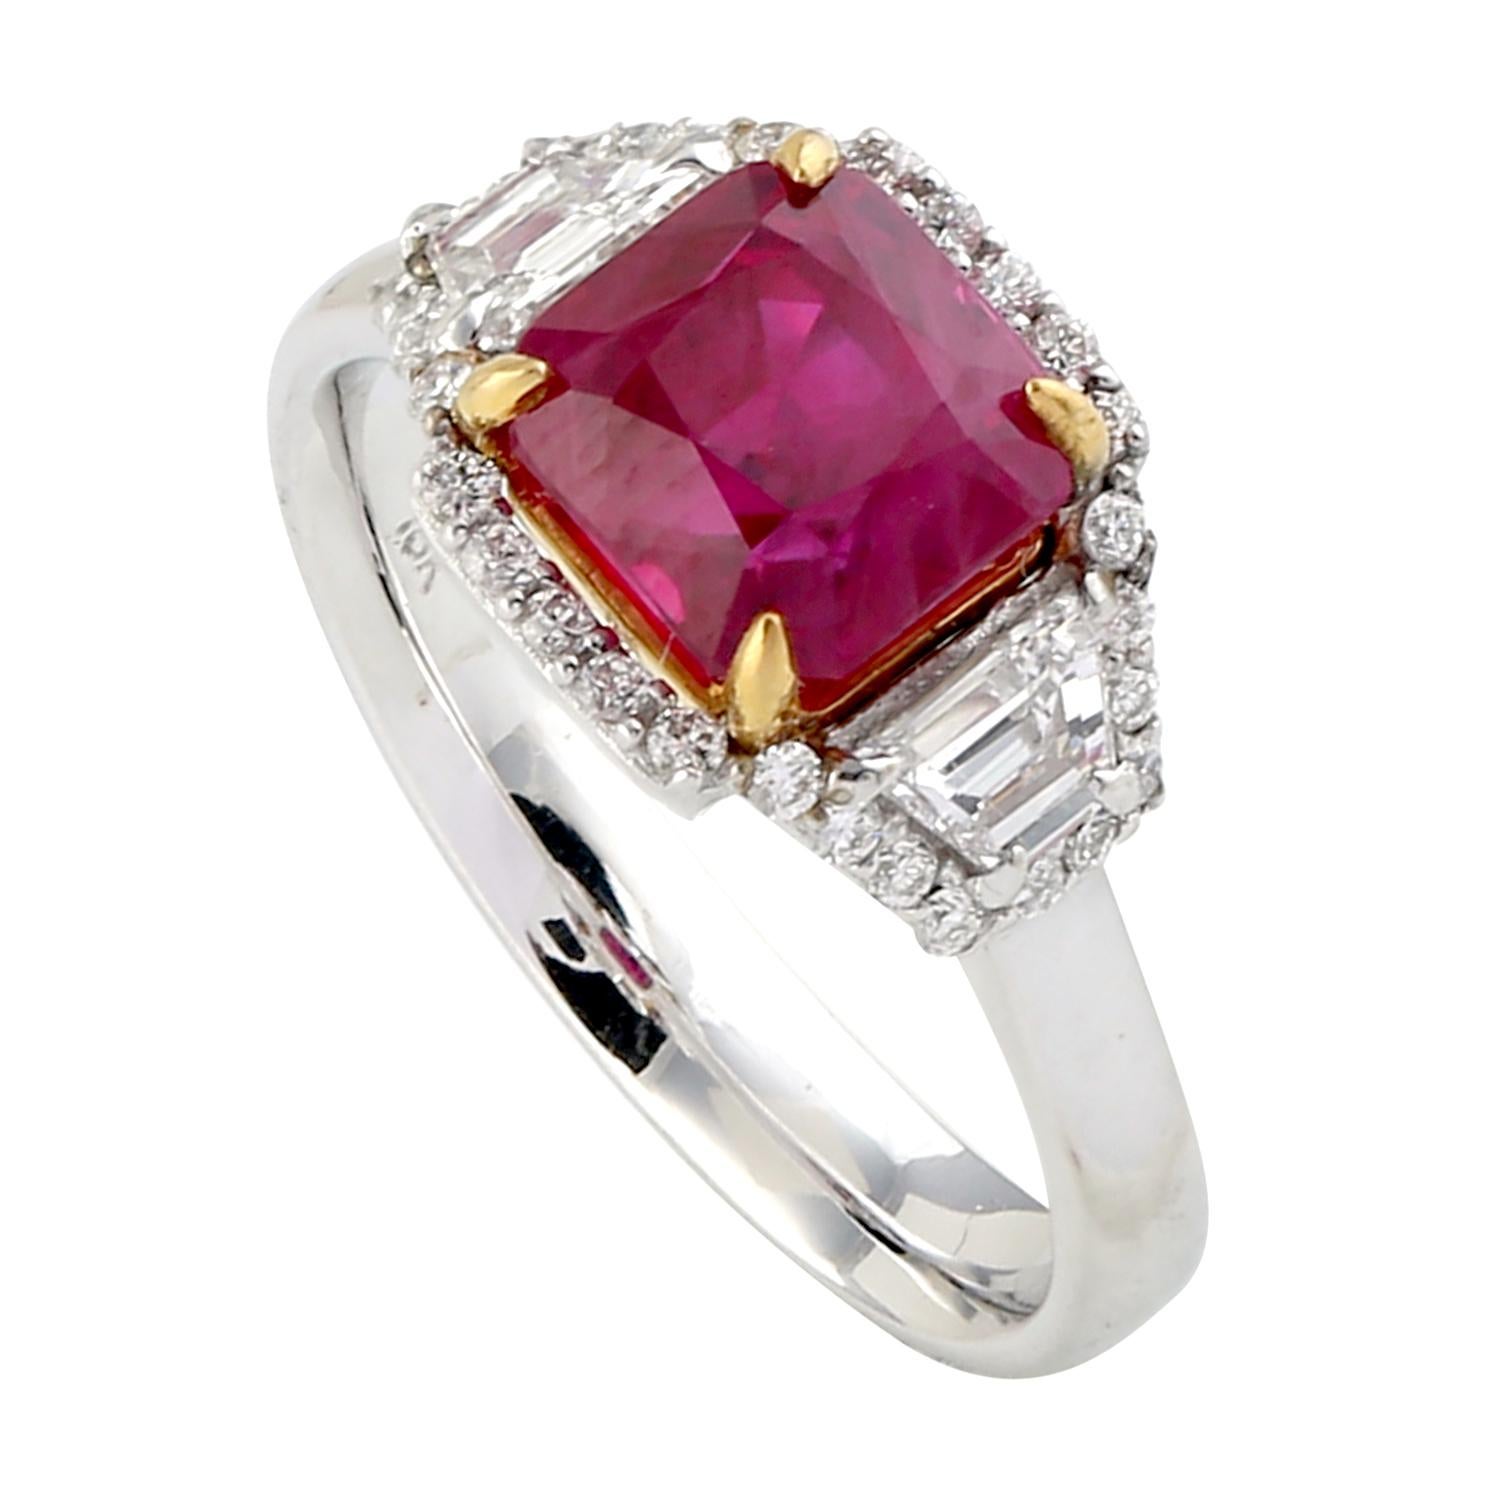 Cushion shape Ruby and Diamond Cocktail Ring in 18K White Gold is stunning and luxurious looking.

Ring Size: 7 ( Can be sized )

18KT: 5.4gms
Diamond: 0.9cts
Ruby: 2.96cts
